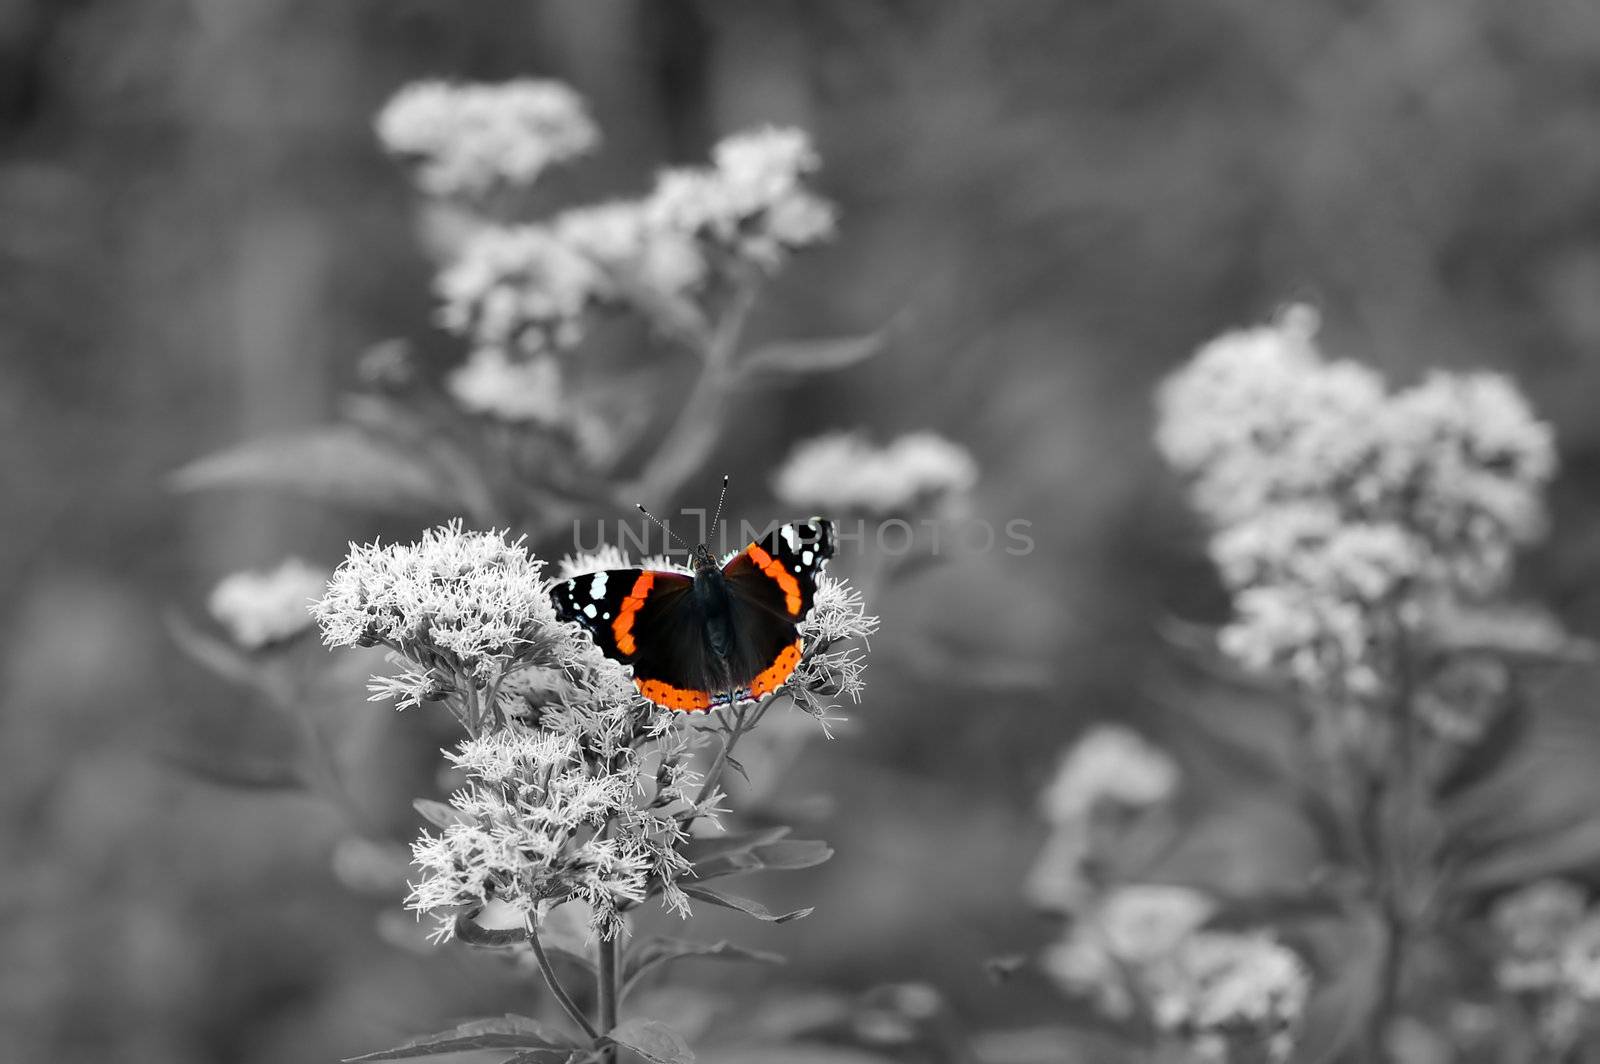 B&W image of beautiful BUTTERFLY in colour sitting on flower ready to take off